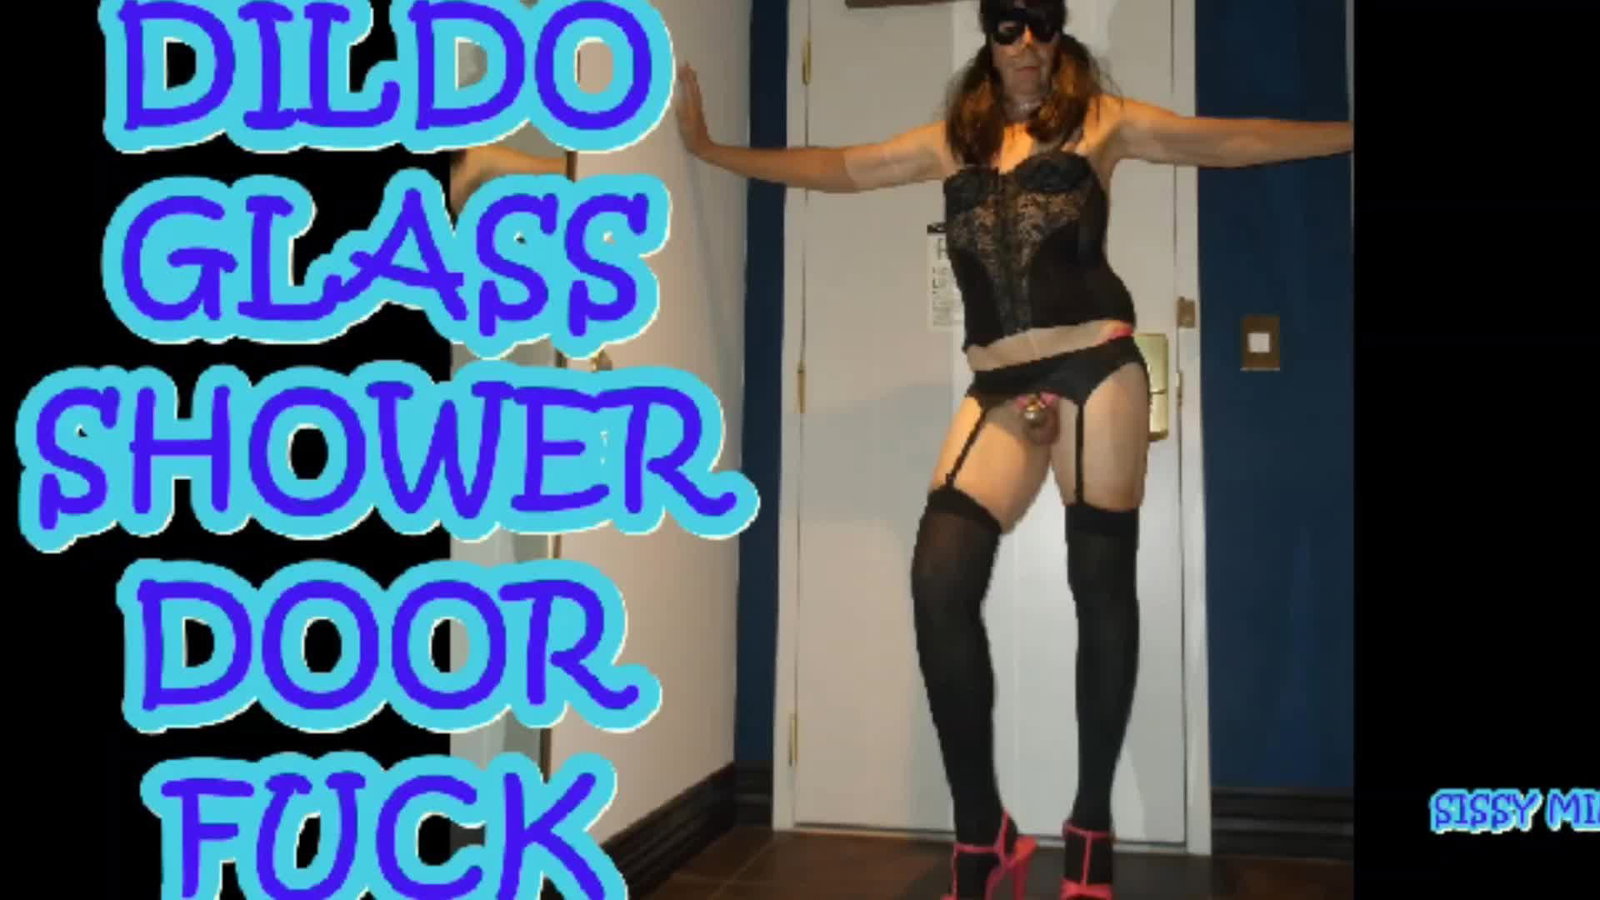 Video post by SissyMindy